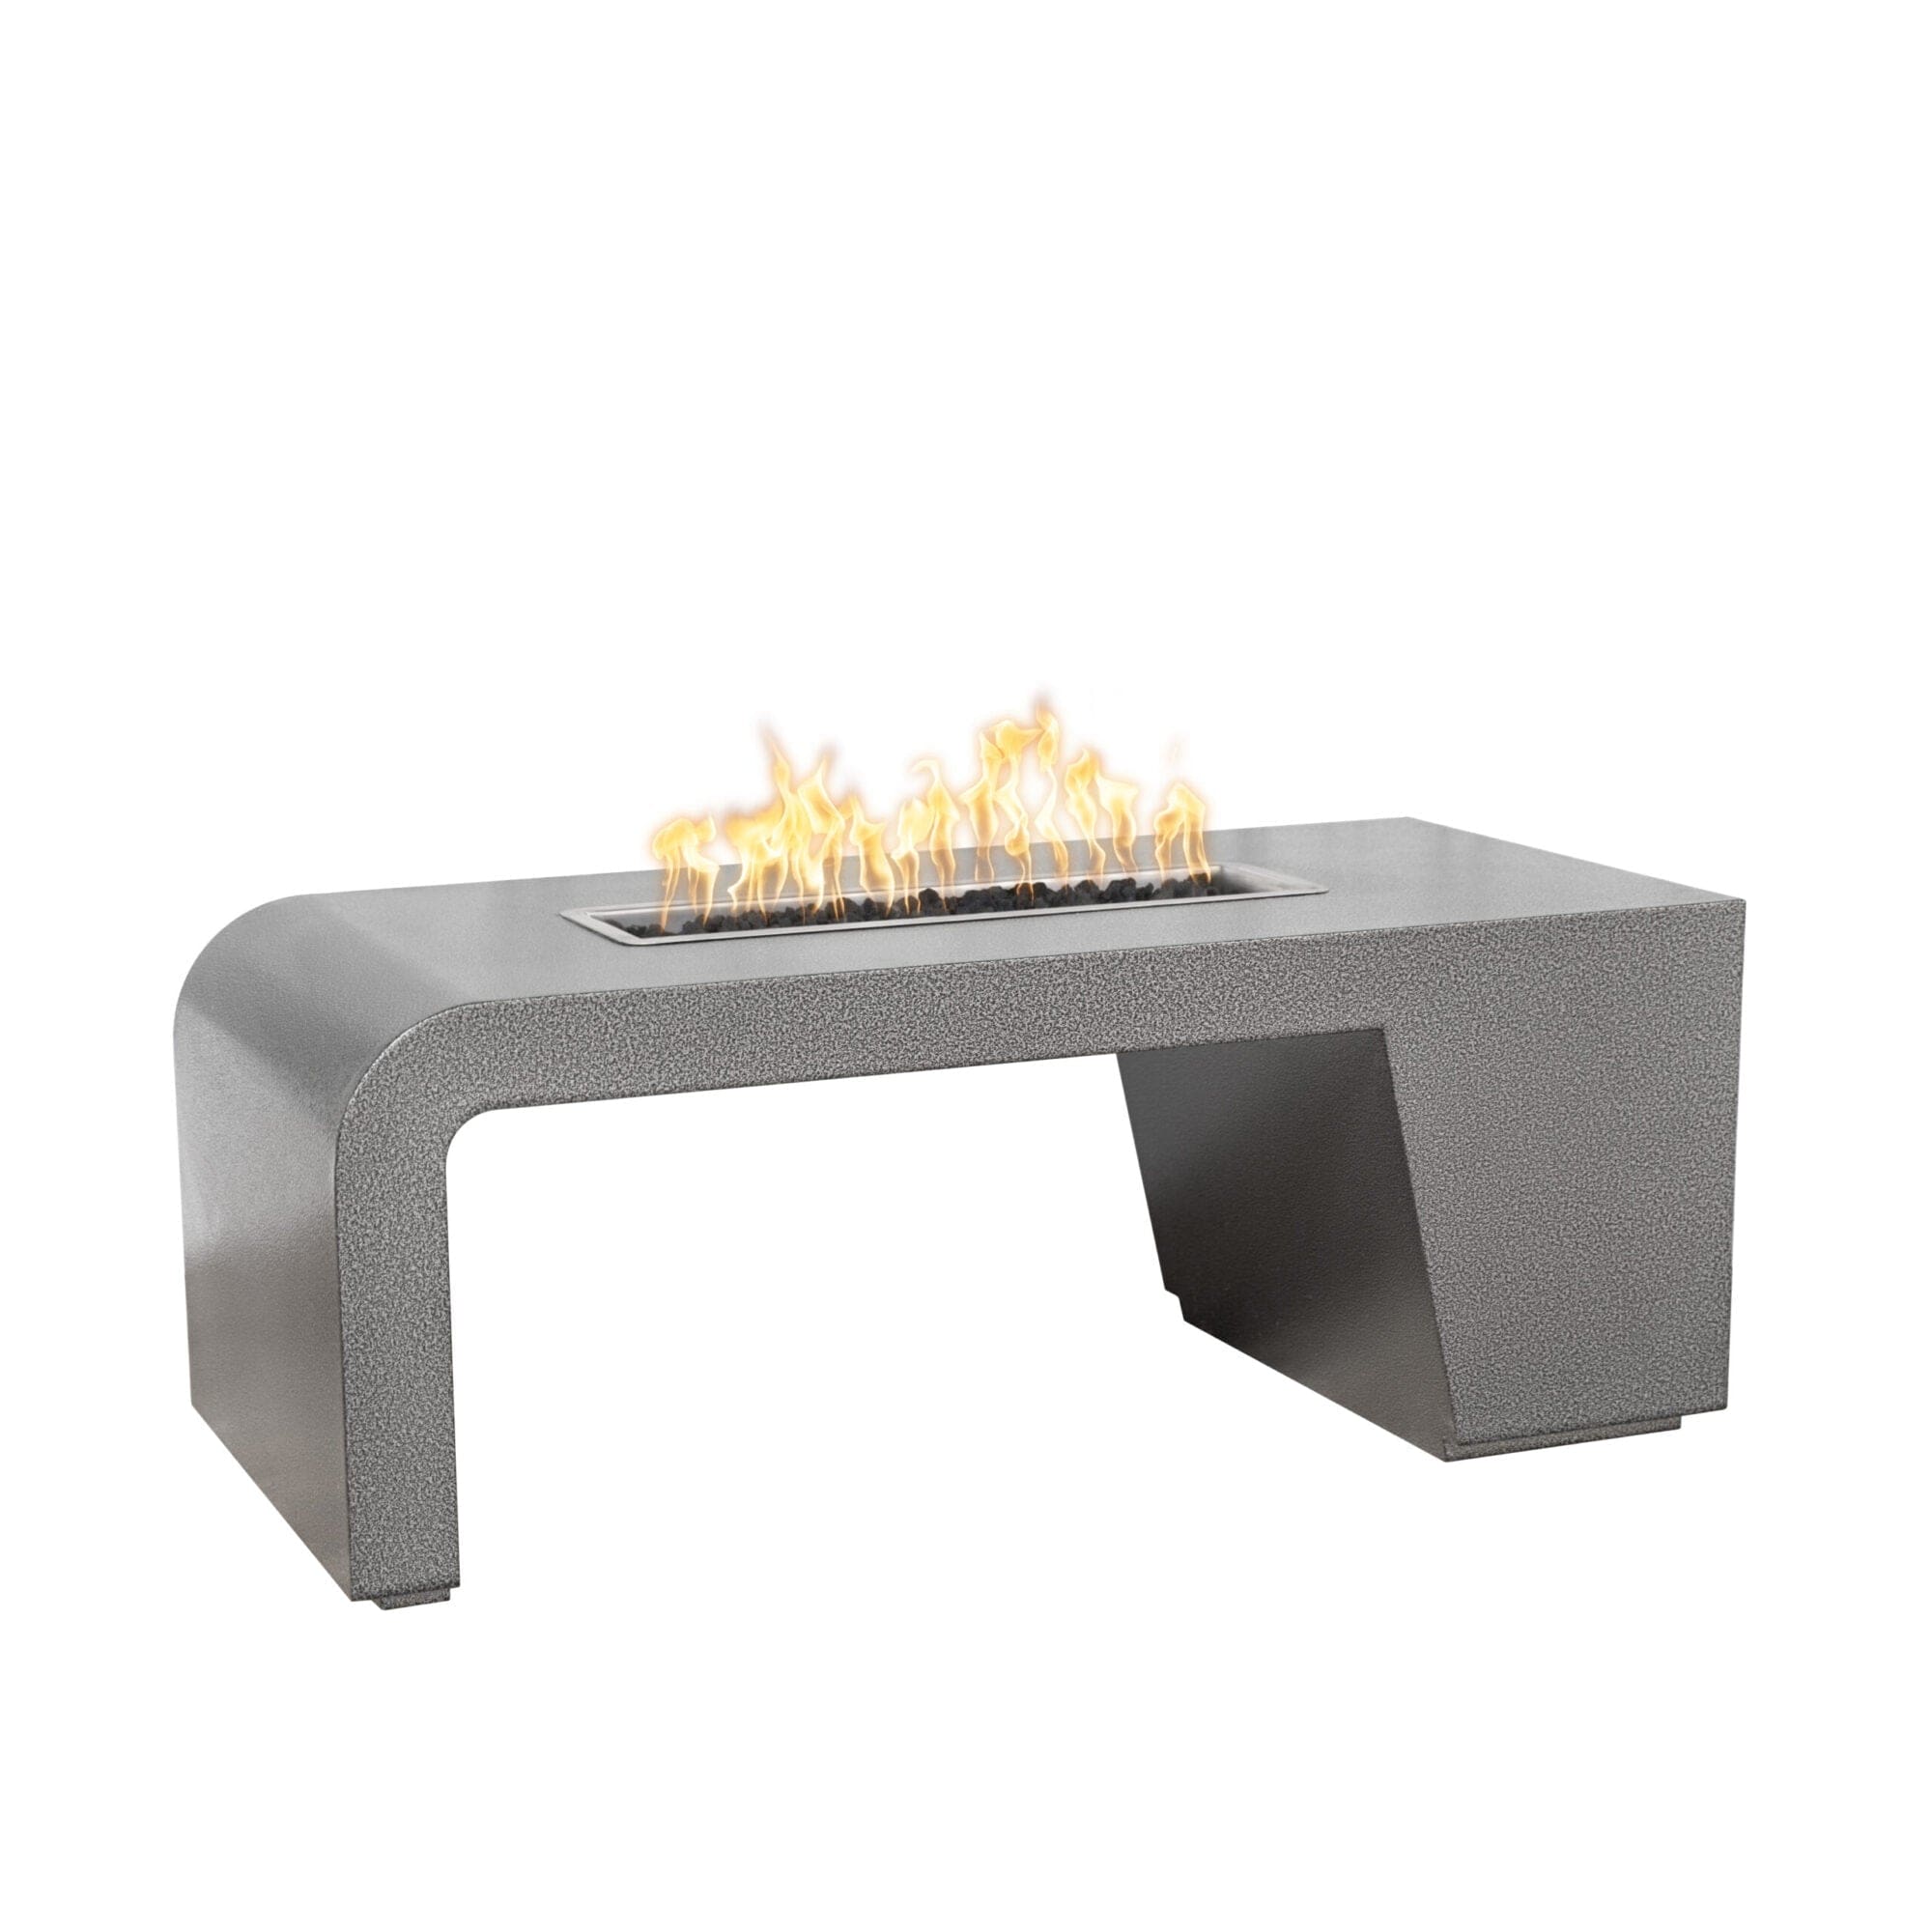 The Outdoor Plus Fire Pit Copper / 60" / Match Lit The Outdoor Plus Maywood Fire Pit | Metal Collection OPT-MYWCPR60